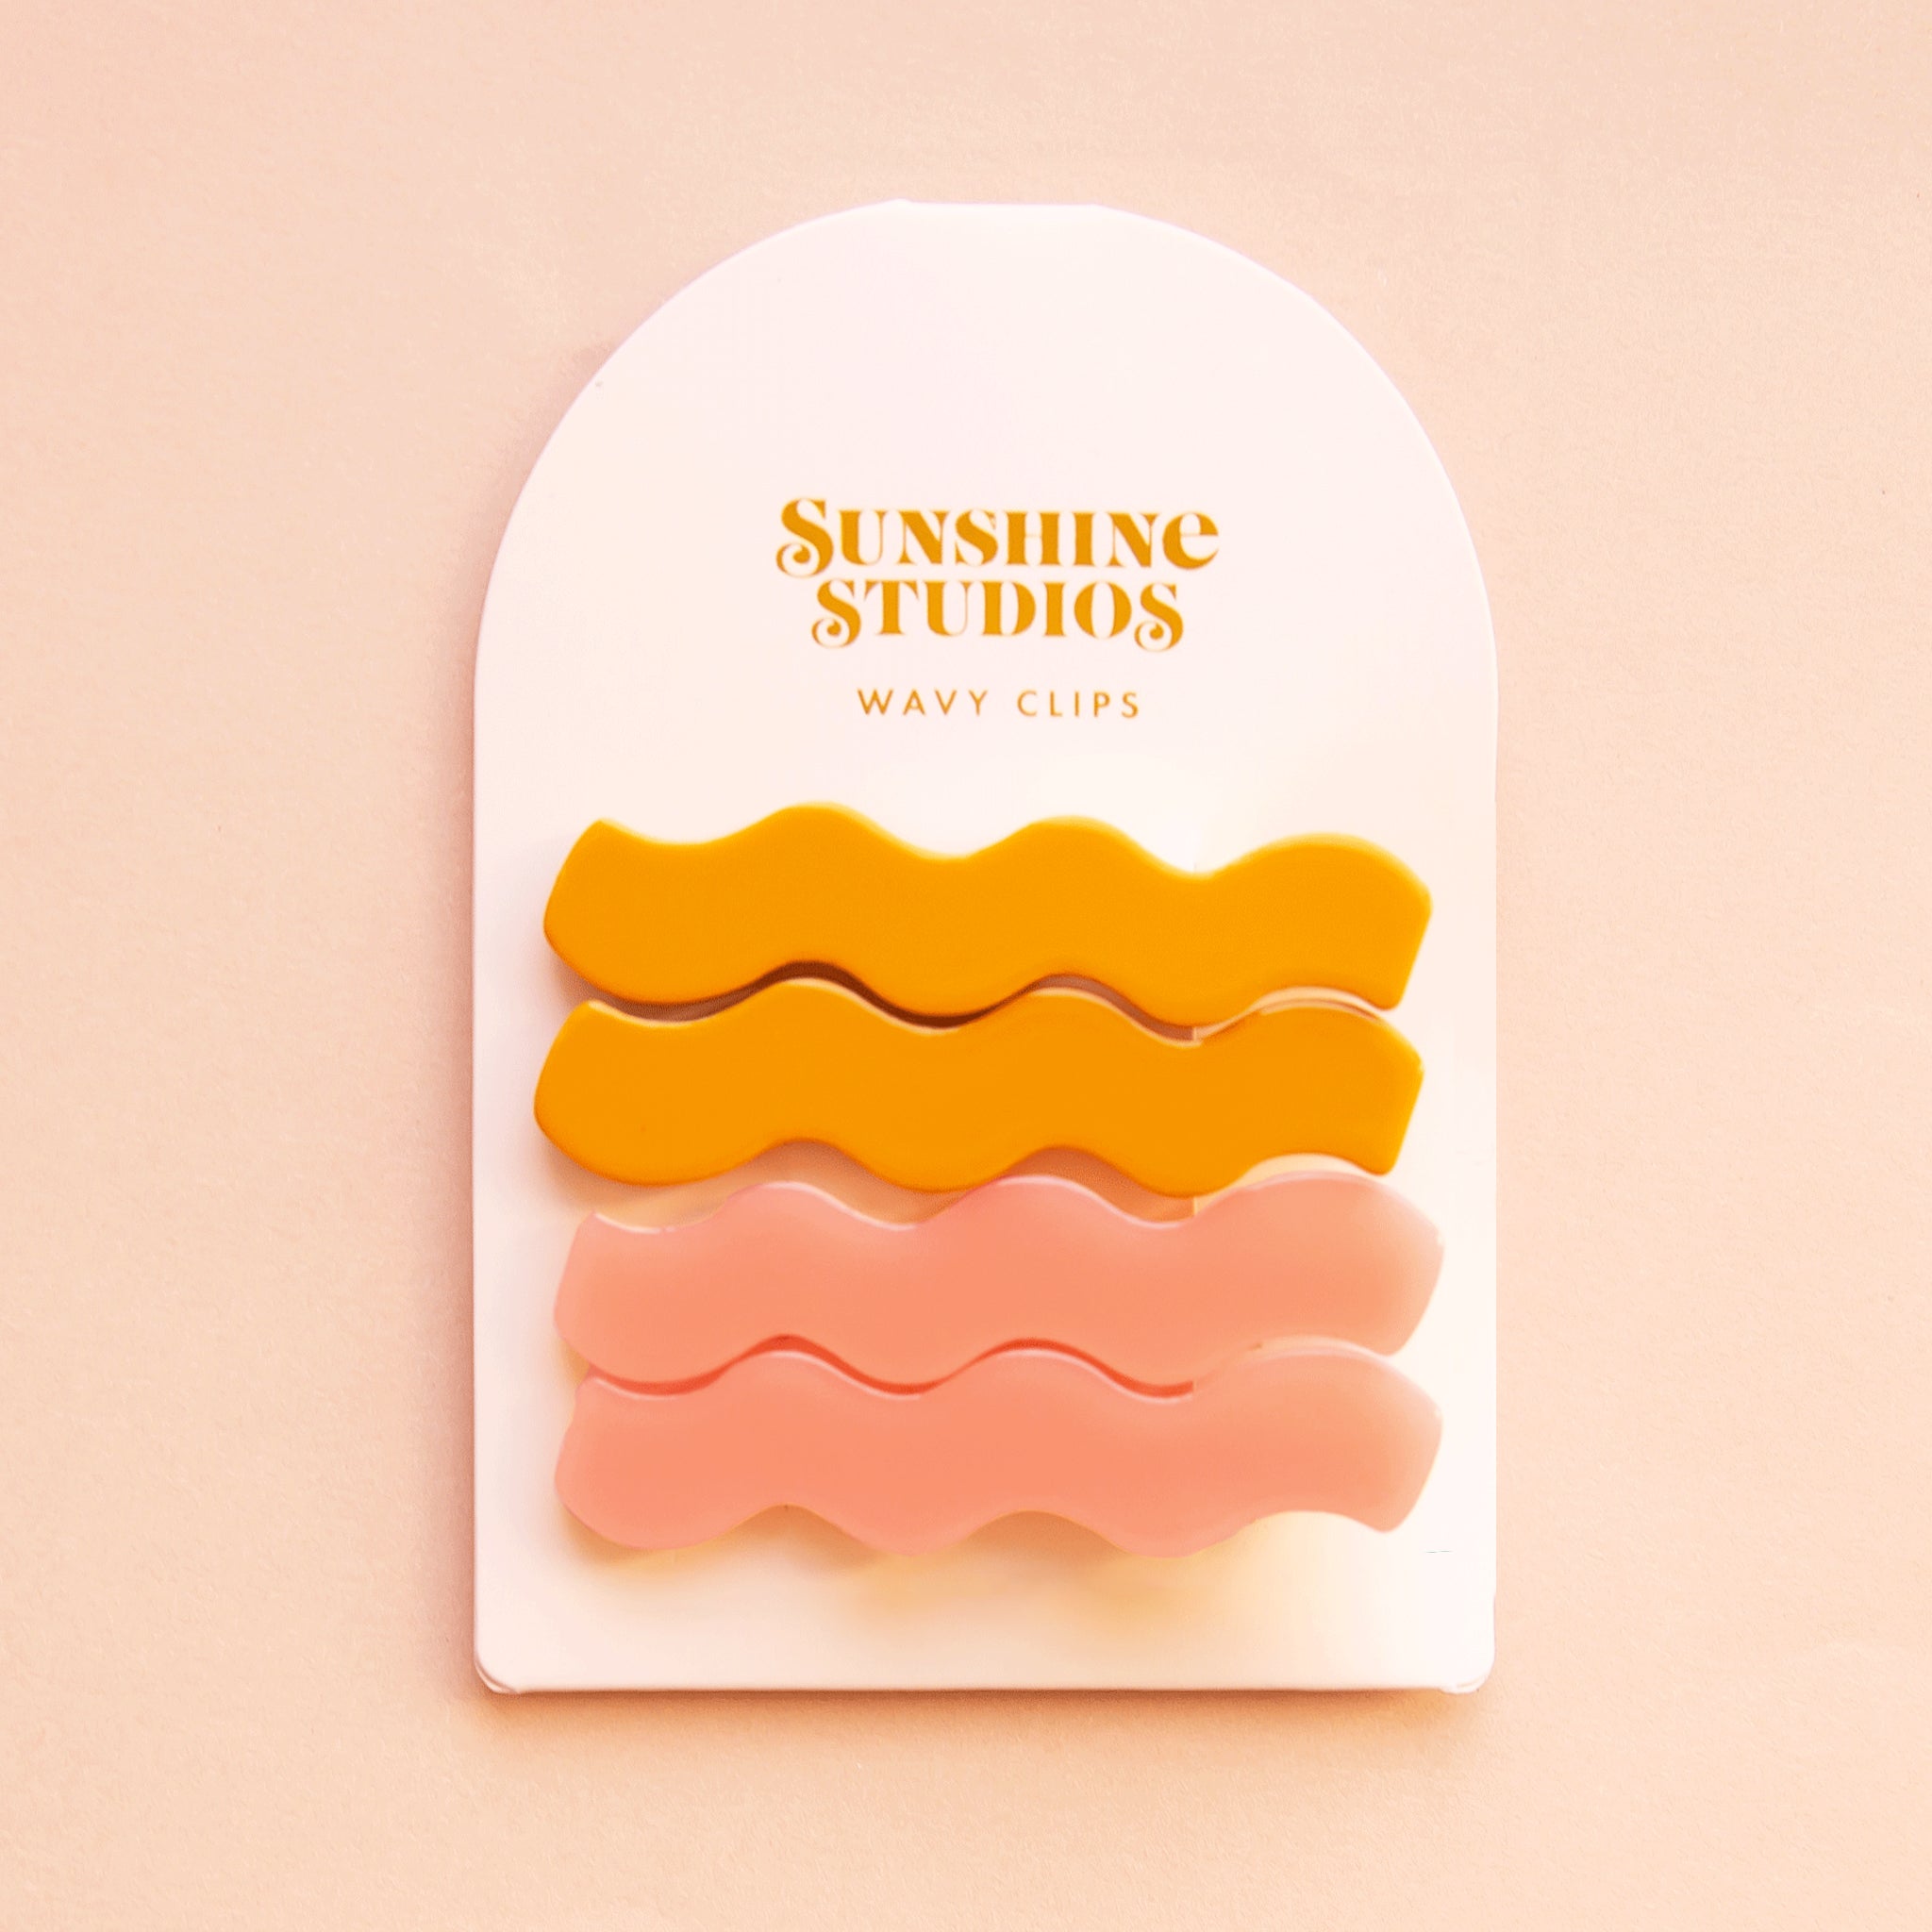 On a pink background two sets of wavy hair clips in a mango orange shade and a light pink shade clipped on a white arched piece of cardboard packaging with orange text at the top that reads, "Sunshine Studios".